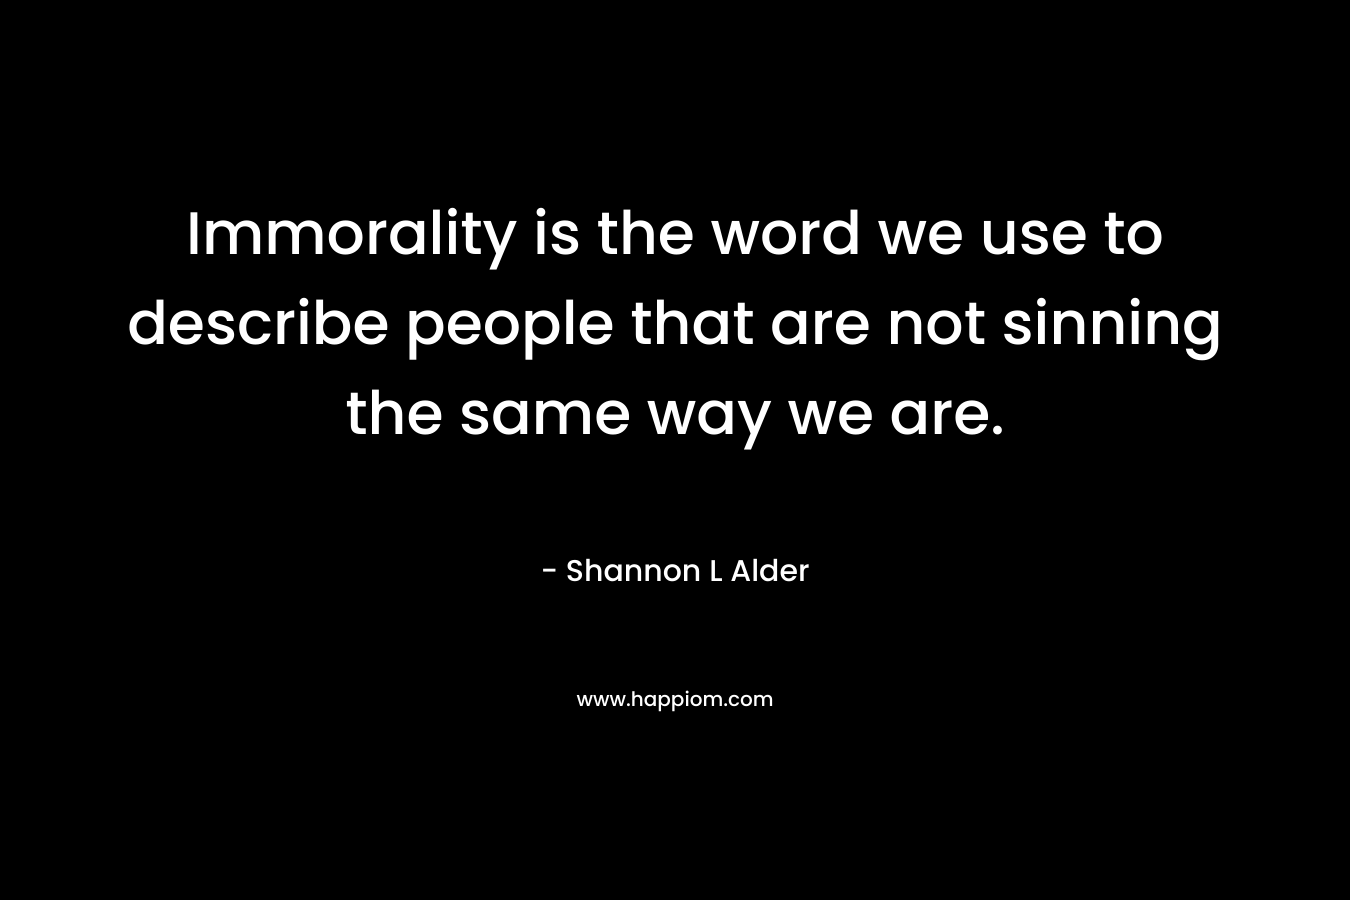 Immorality is the word we use to describe people that are not sinning the same way we are. – Shannon L Alder